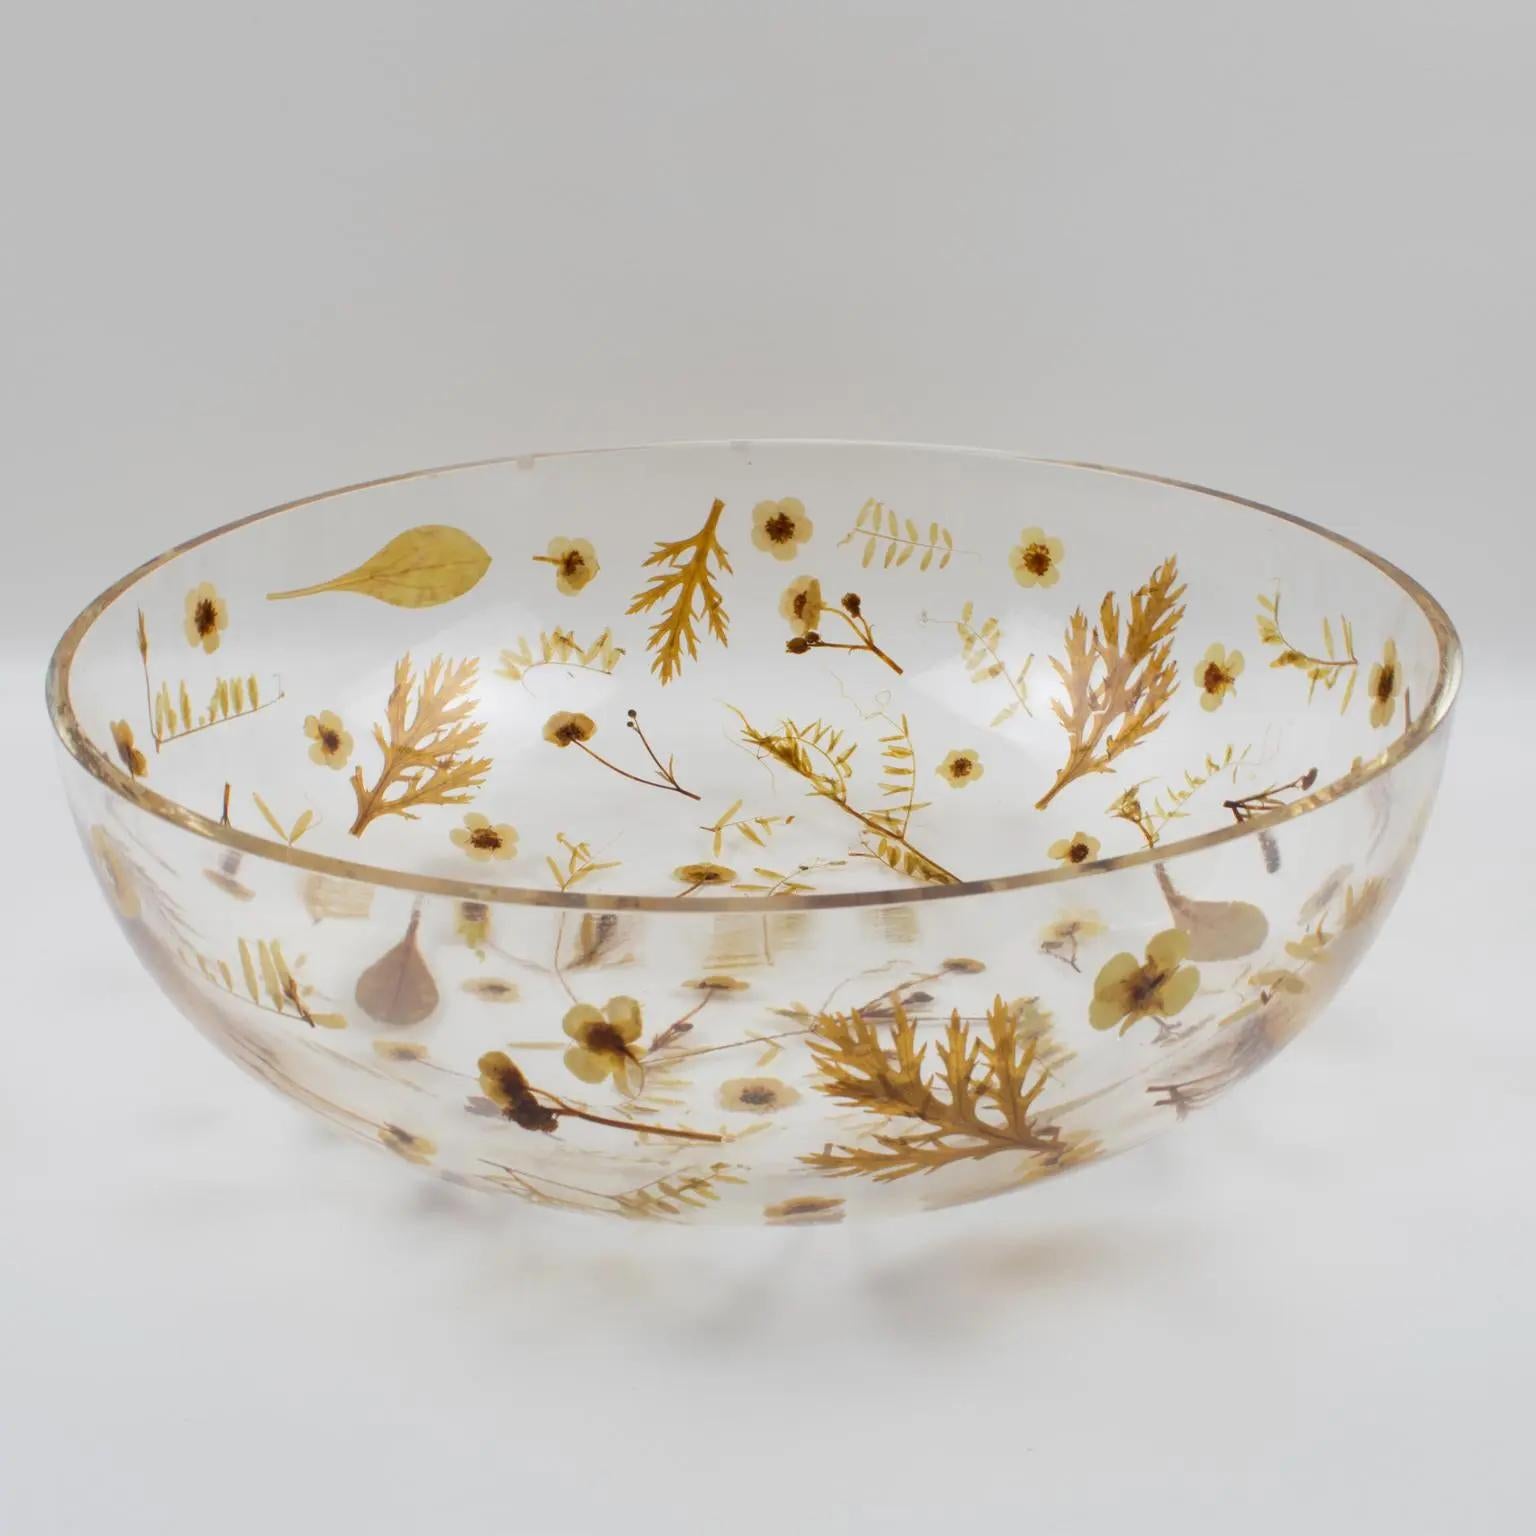 This lovely Resin decorative bowl, centerpiece, or serving dish was designed by Resinplast, Italy, in the 1970s. The extra thick clear resin or acrylic deep rounded oversized shape has assorted autumn leaves and dried flowers embedded in the